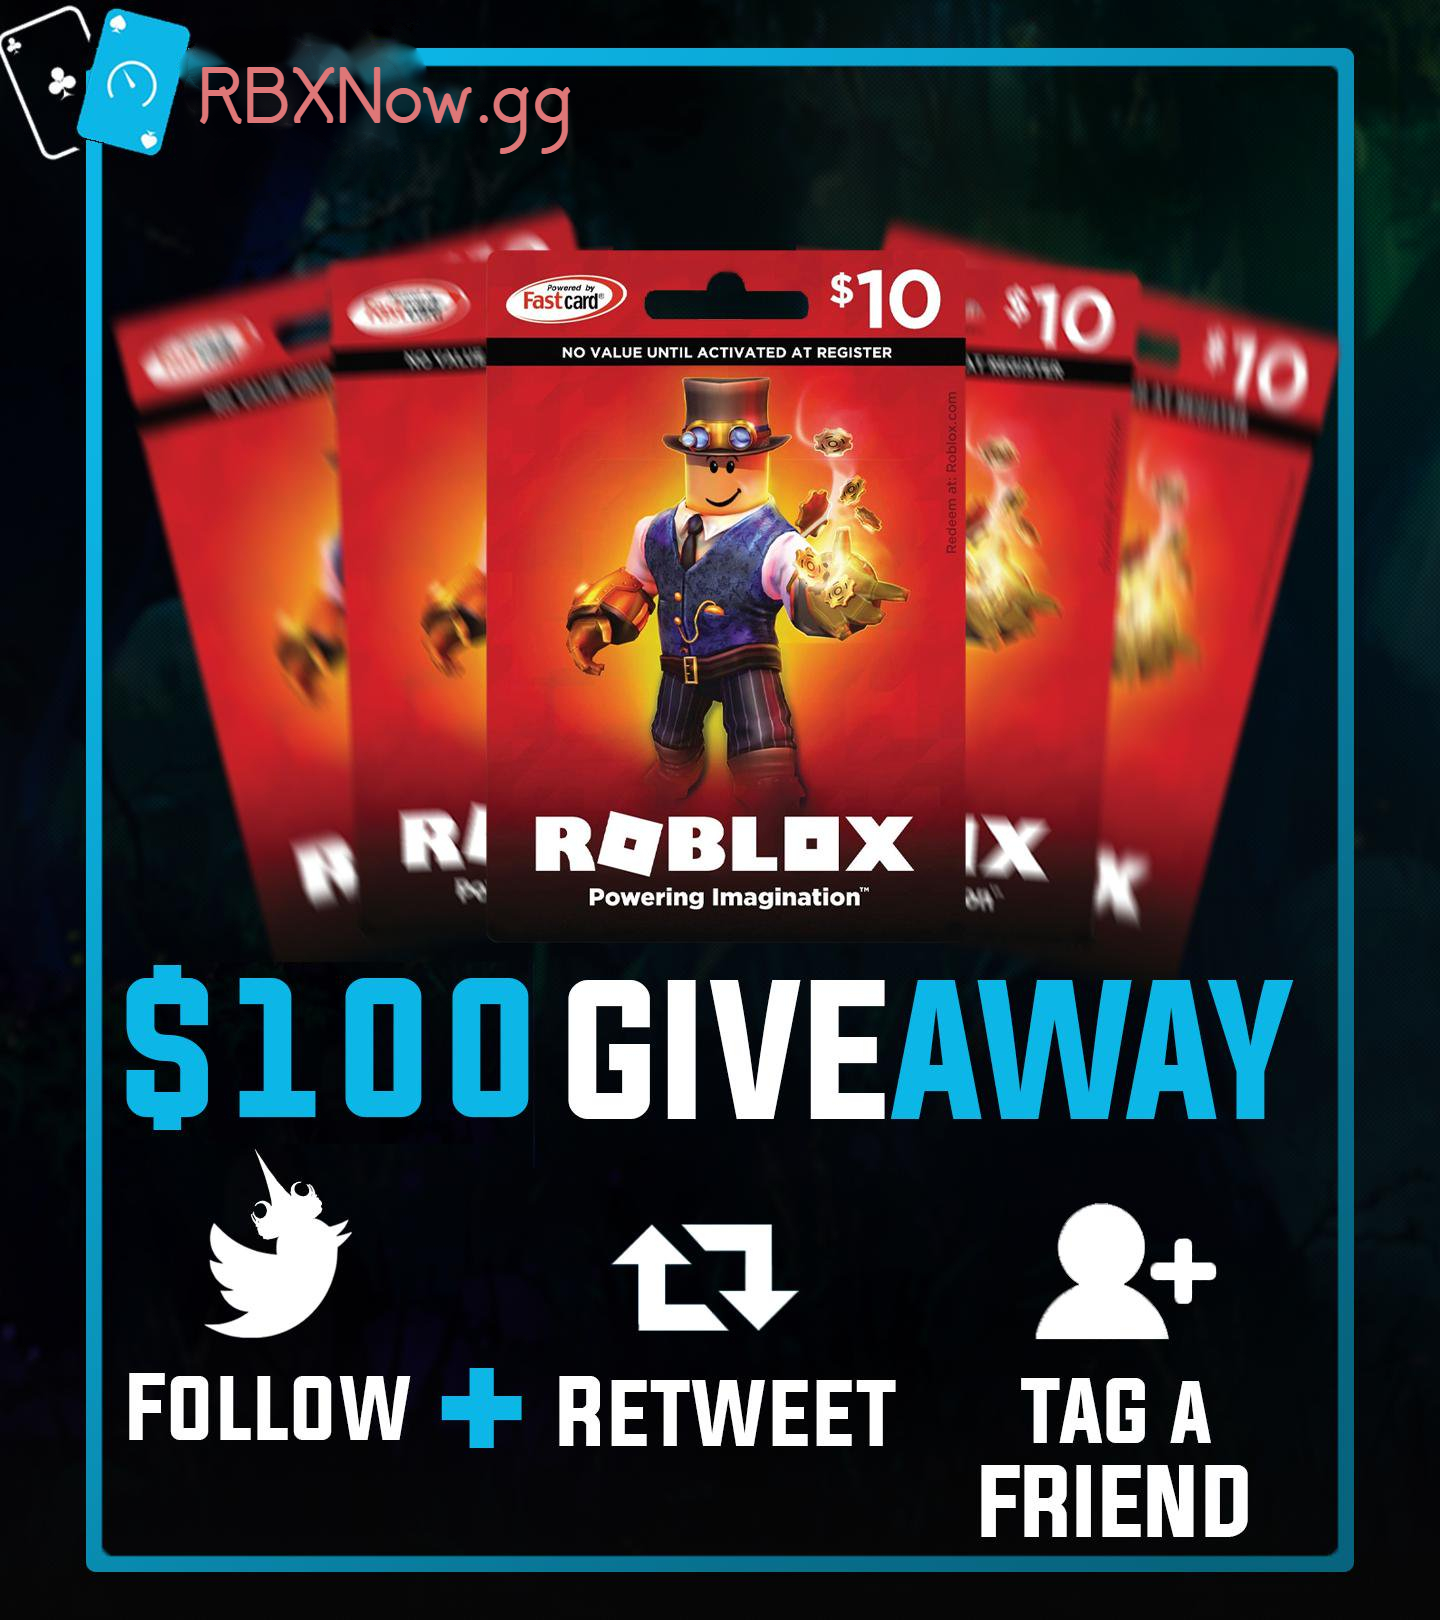 Rbxnow Gg On Twitter 100 Roblox Giftcard 10 Winners